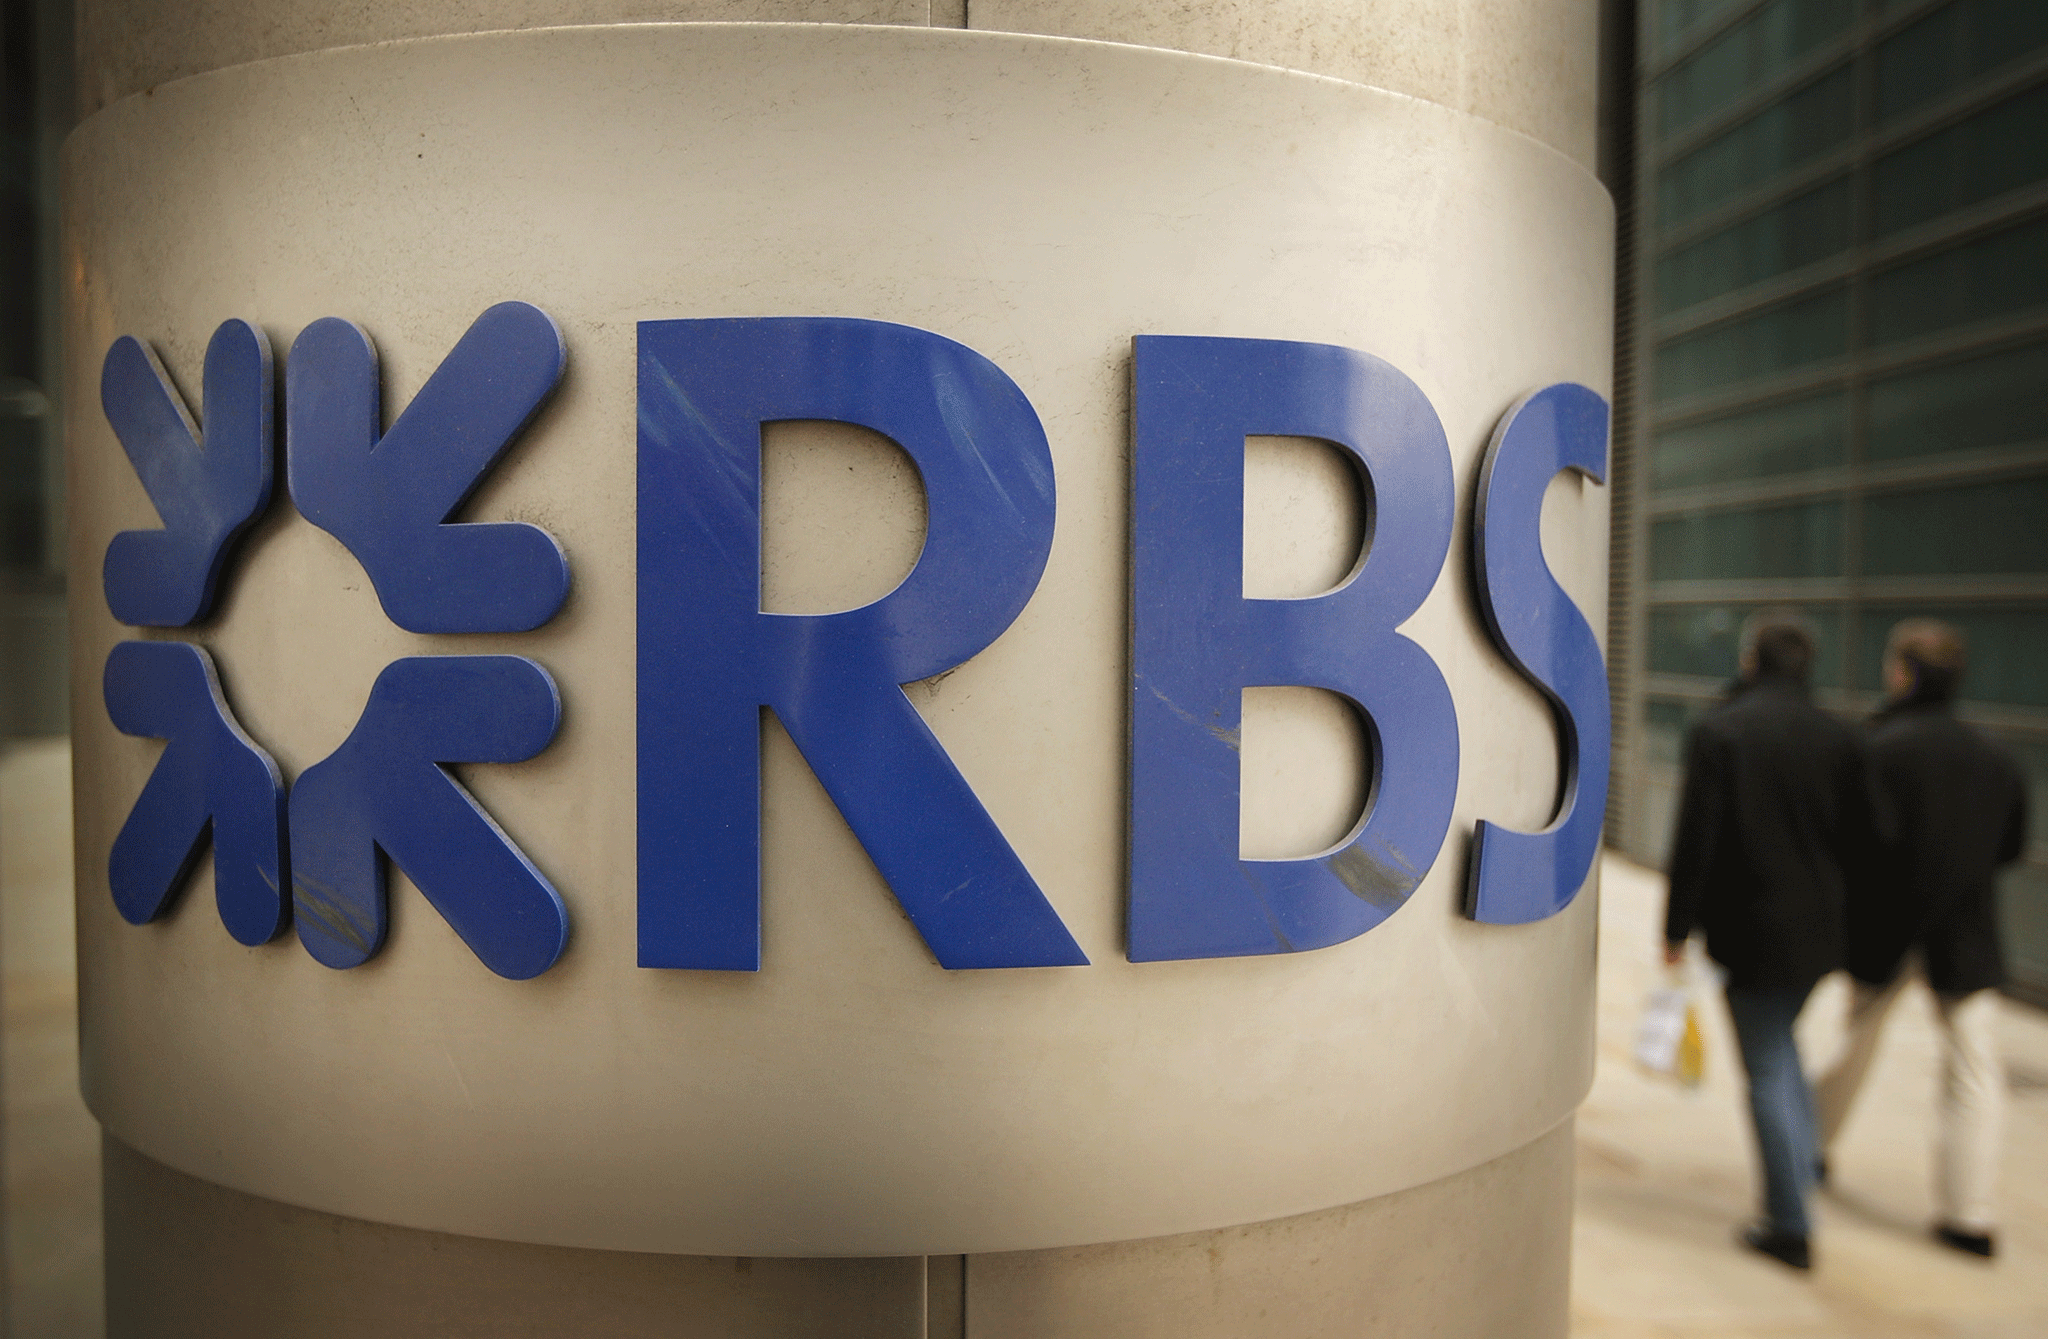 RBS agrees to pay $5.5bn to US authorities over sub-prime mortage bond sales